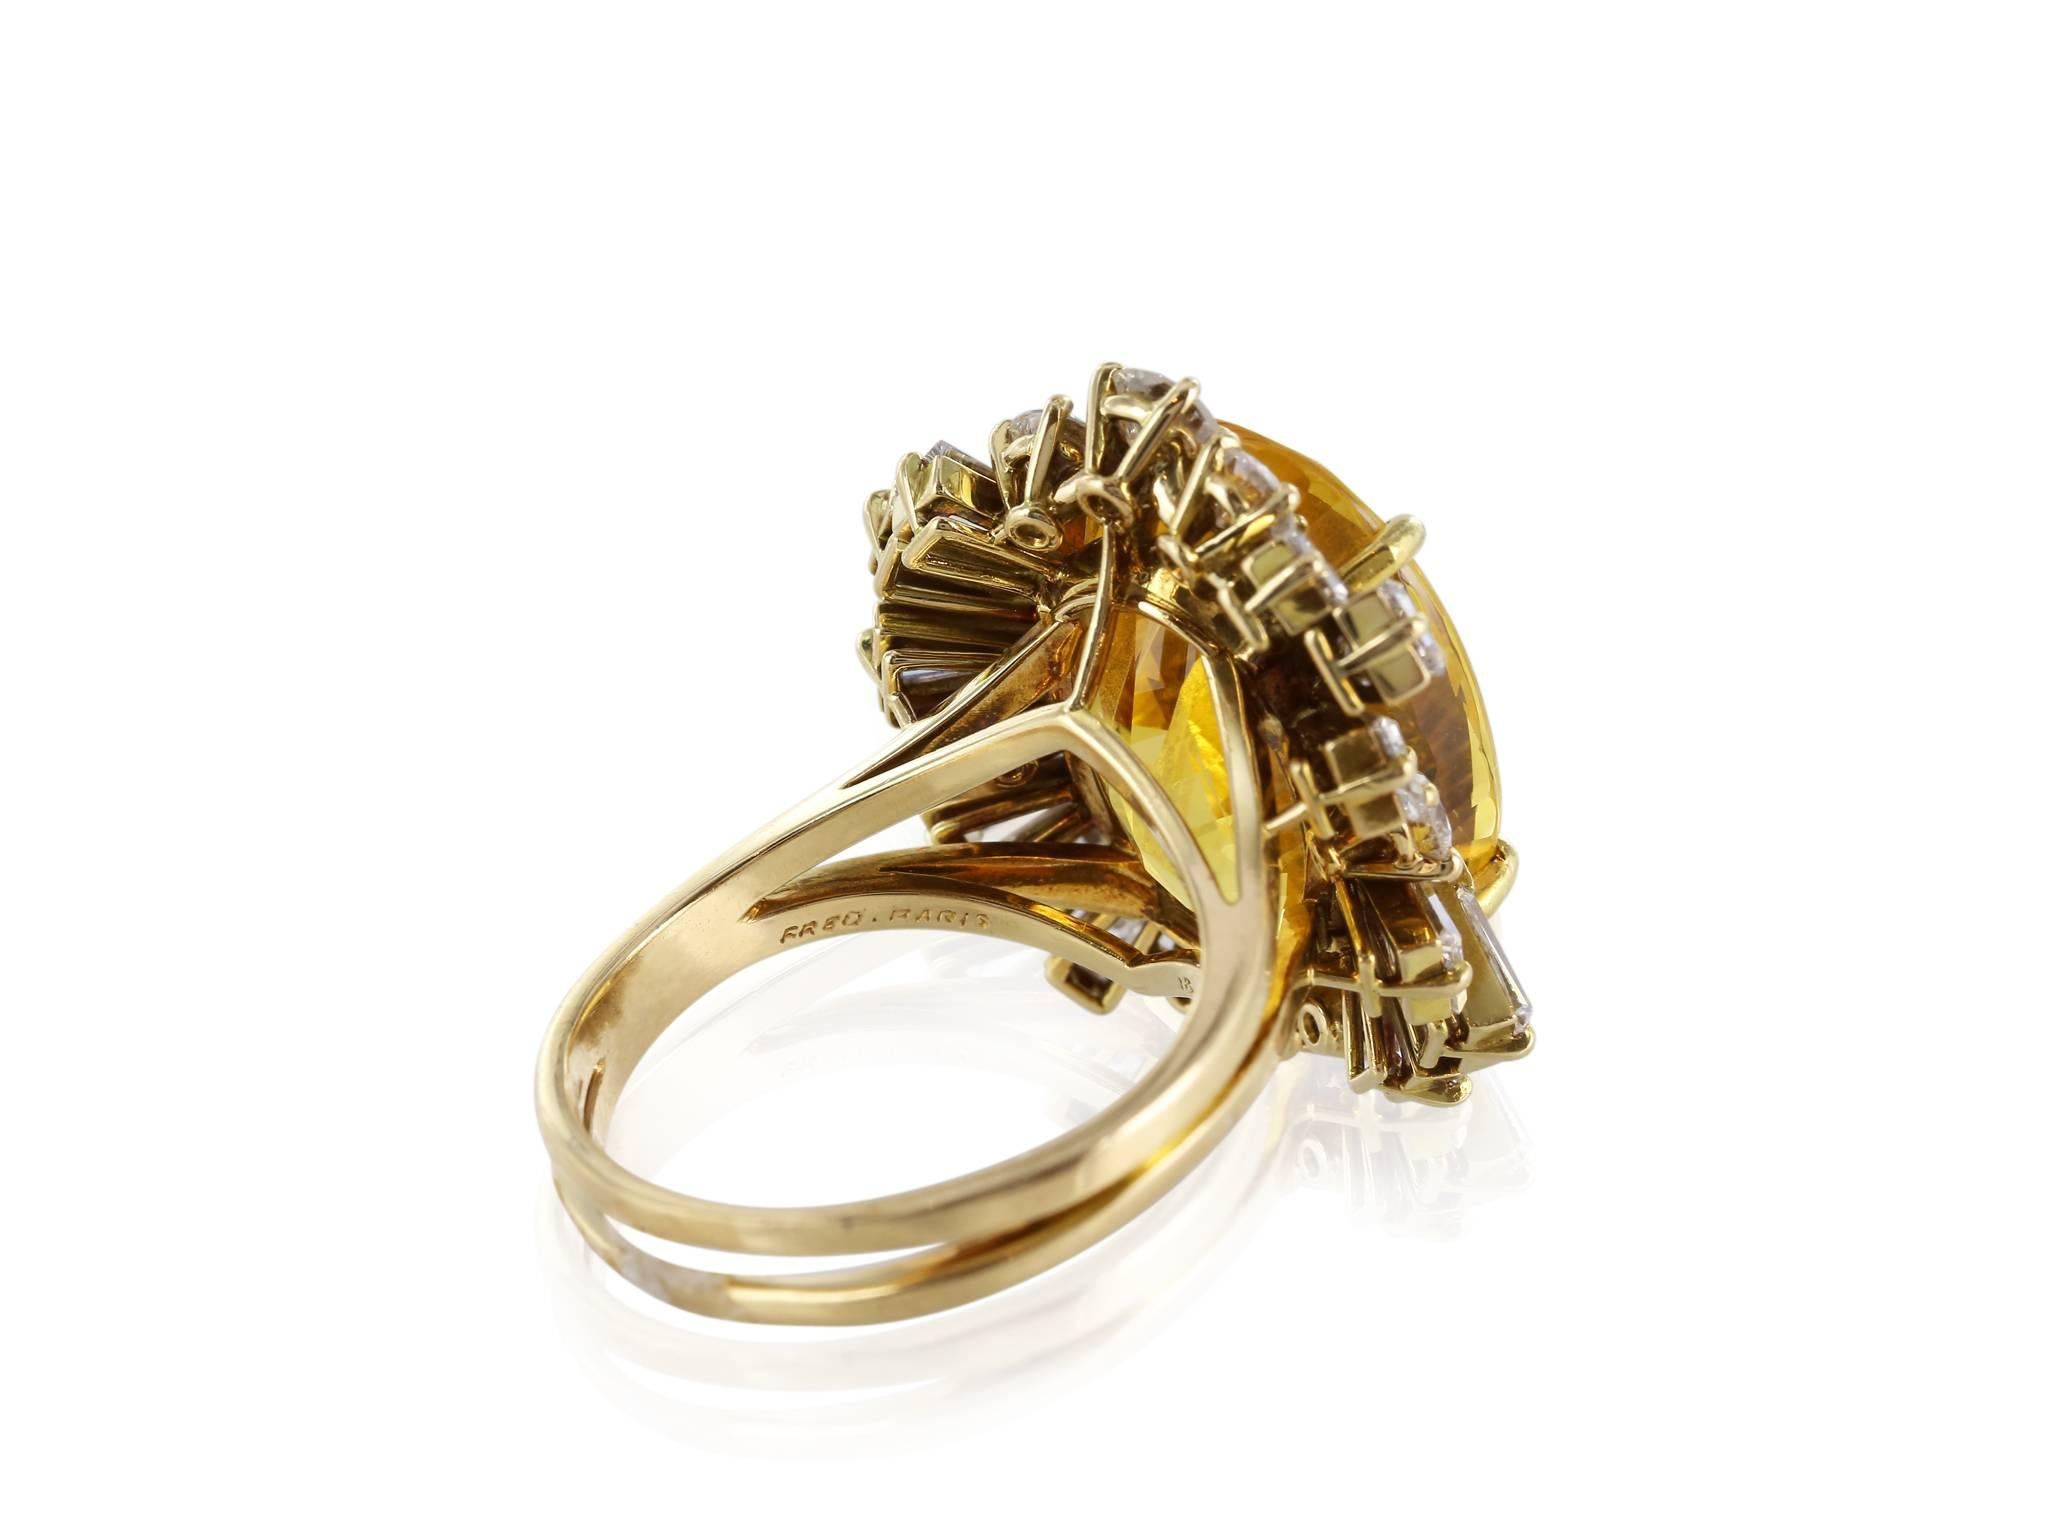 18 Karat yellow gold signed Fred of Paris 22 carats golden sapphire ring with a halo of approximately 3.25 carats of mixed baguette and round brilliant cut diamonds.